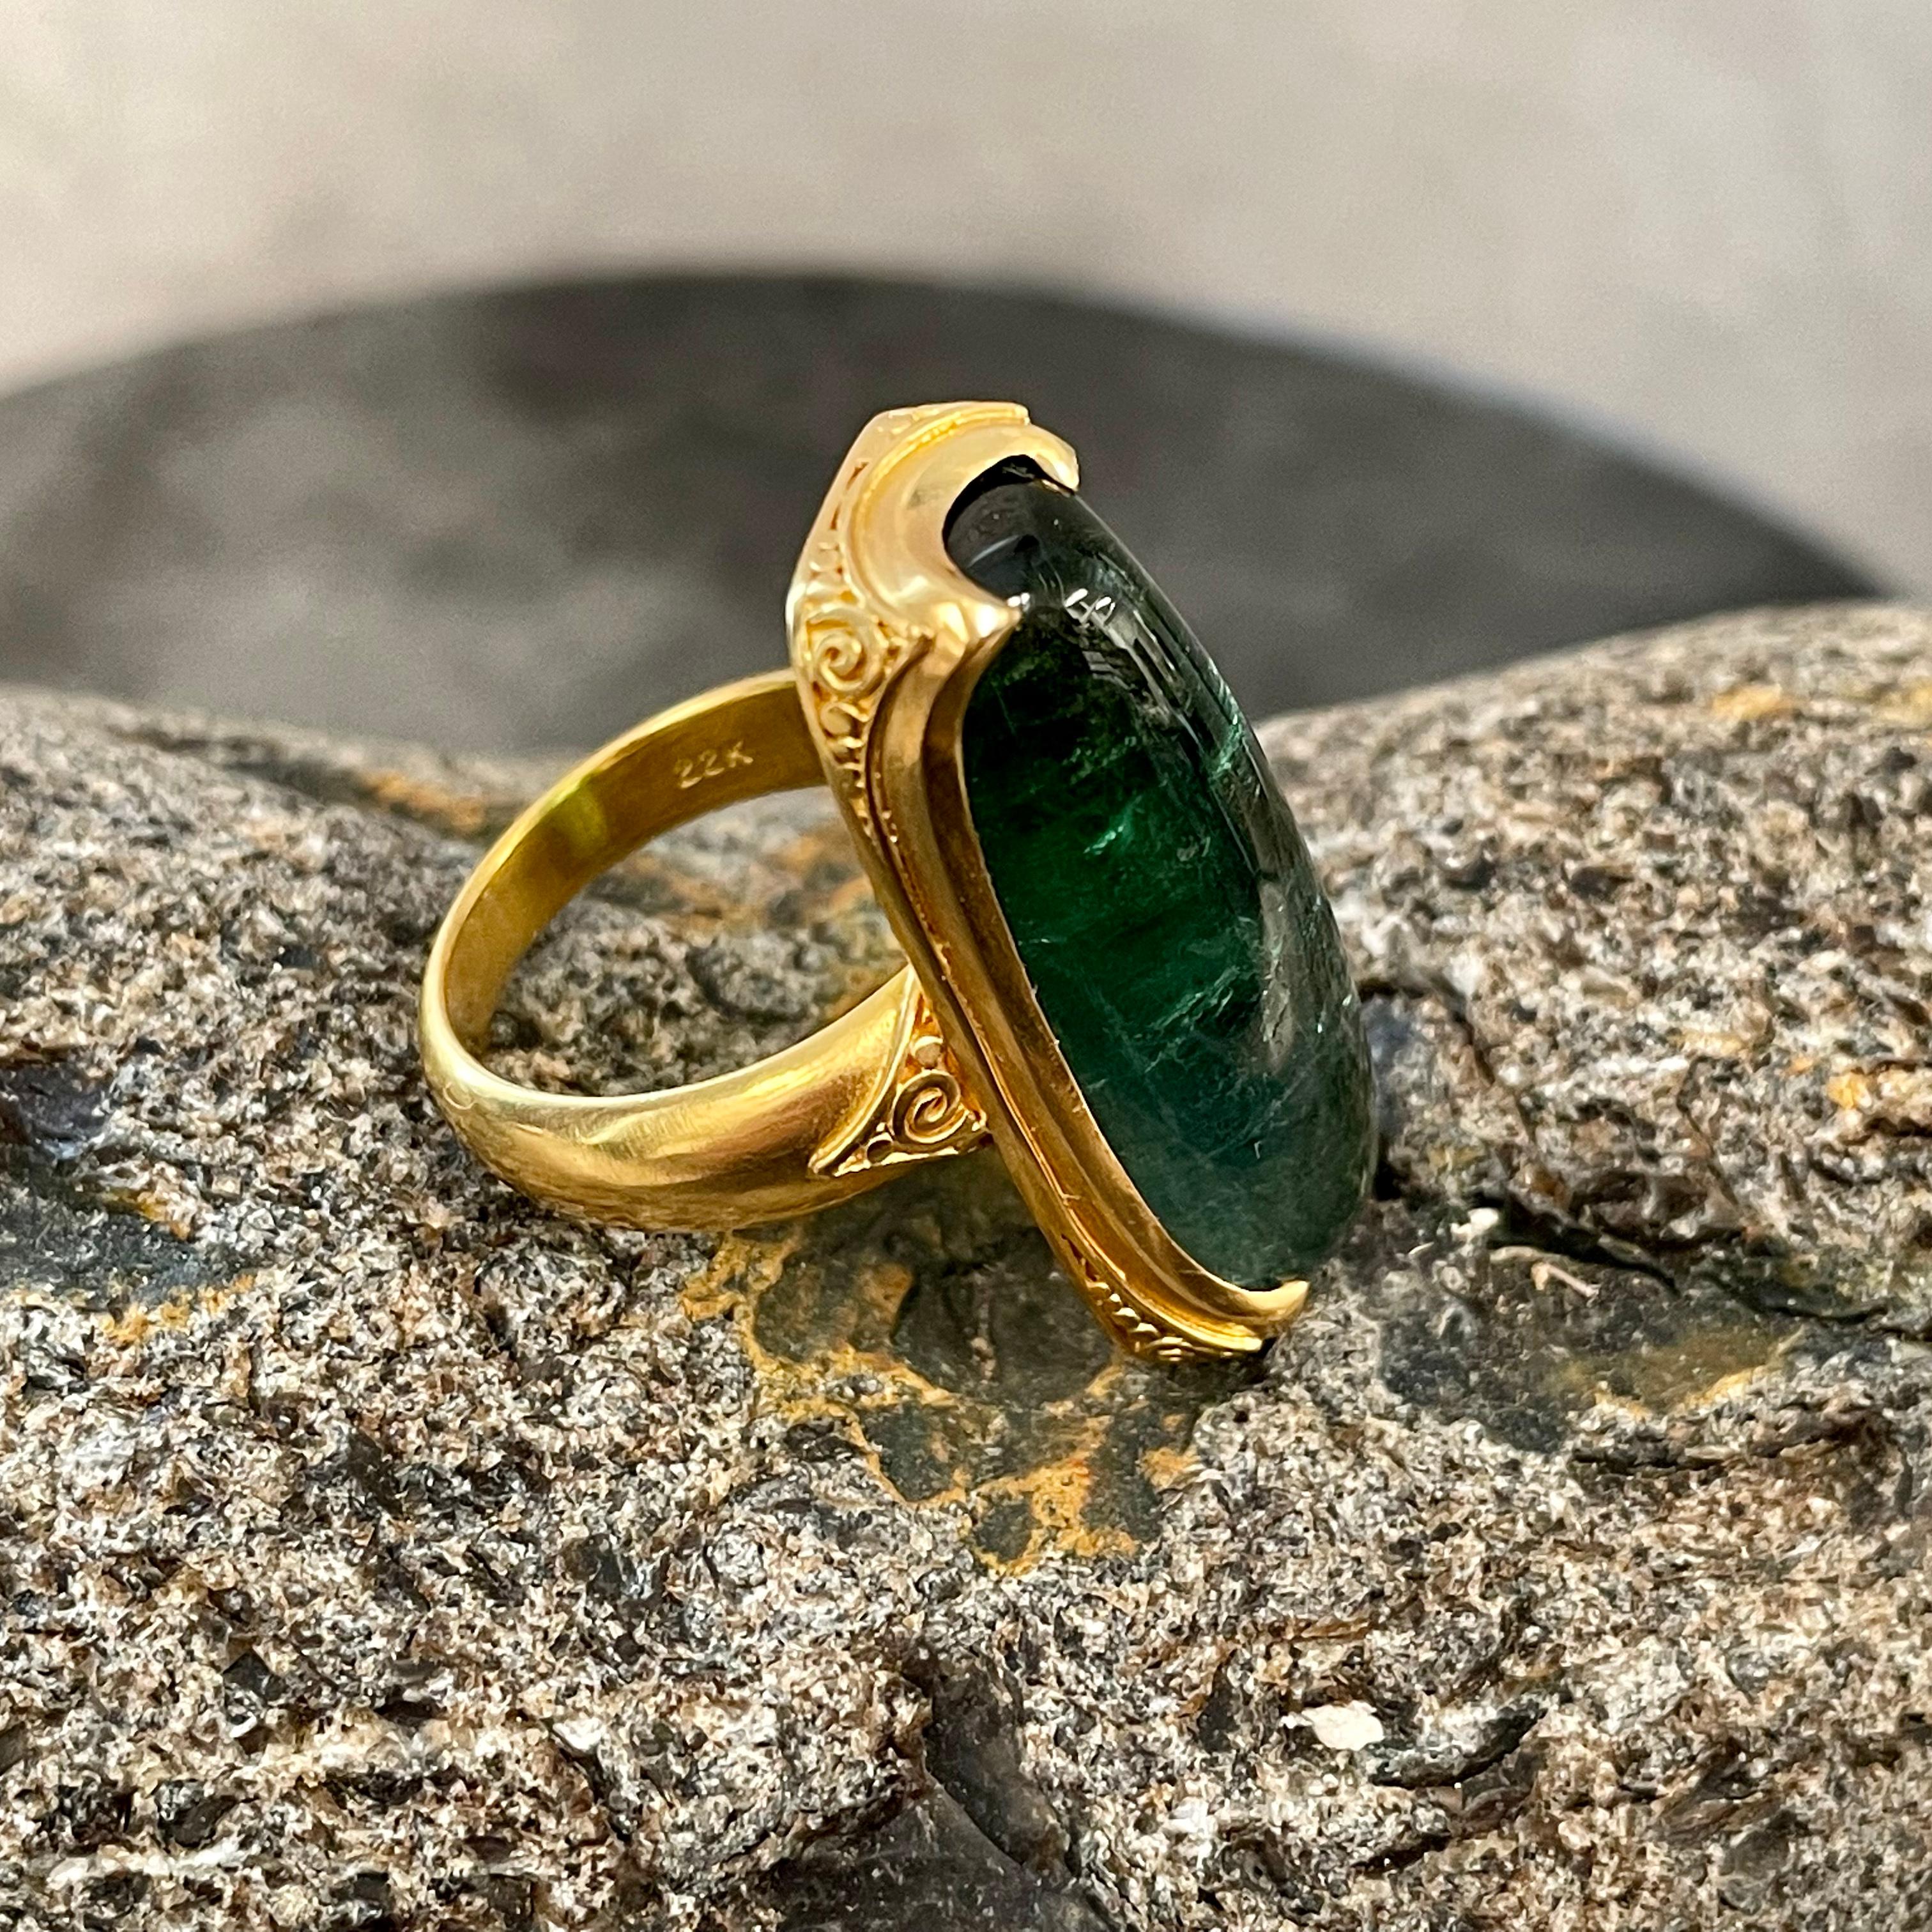 Steven Battelle 22.9 Carats Cabochon Green Tourmaline 22K Gold Ring In New Condition For Sale In Soquel, CA